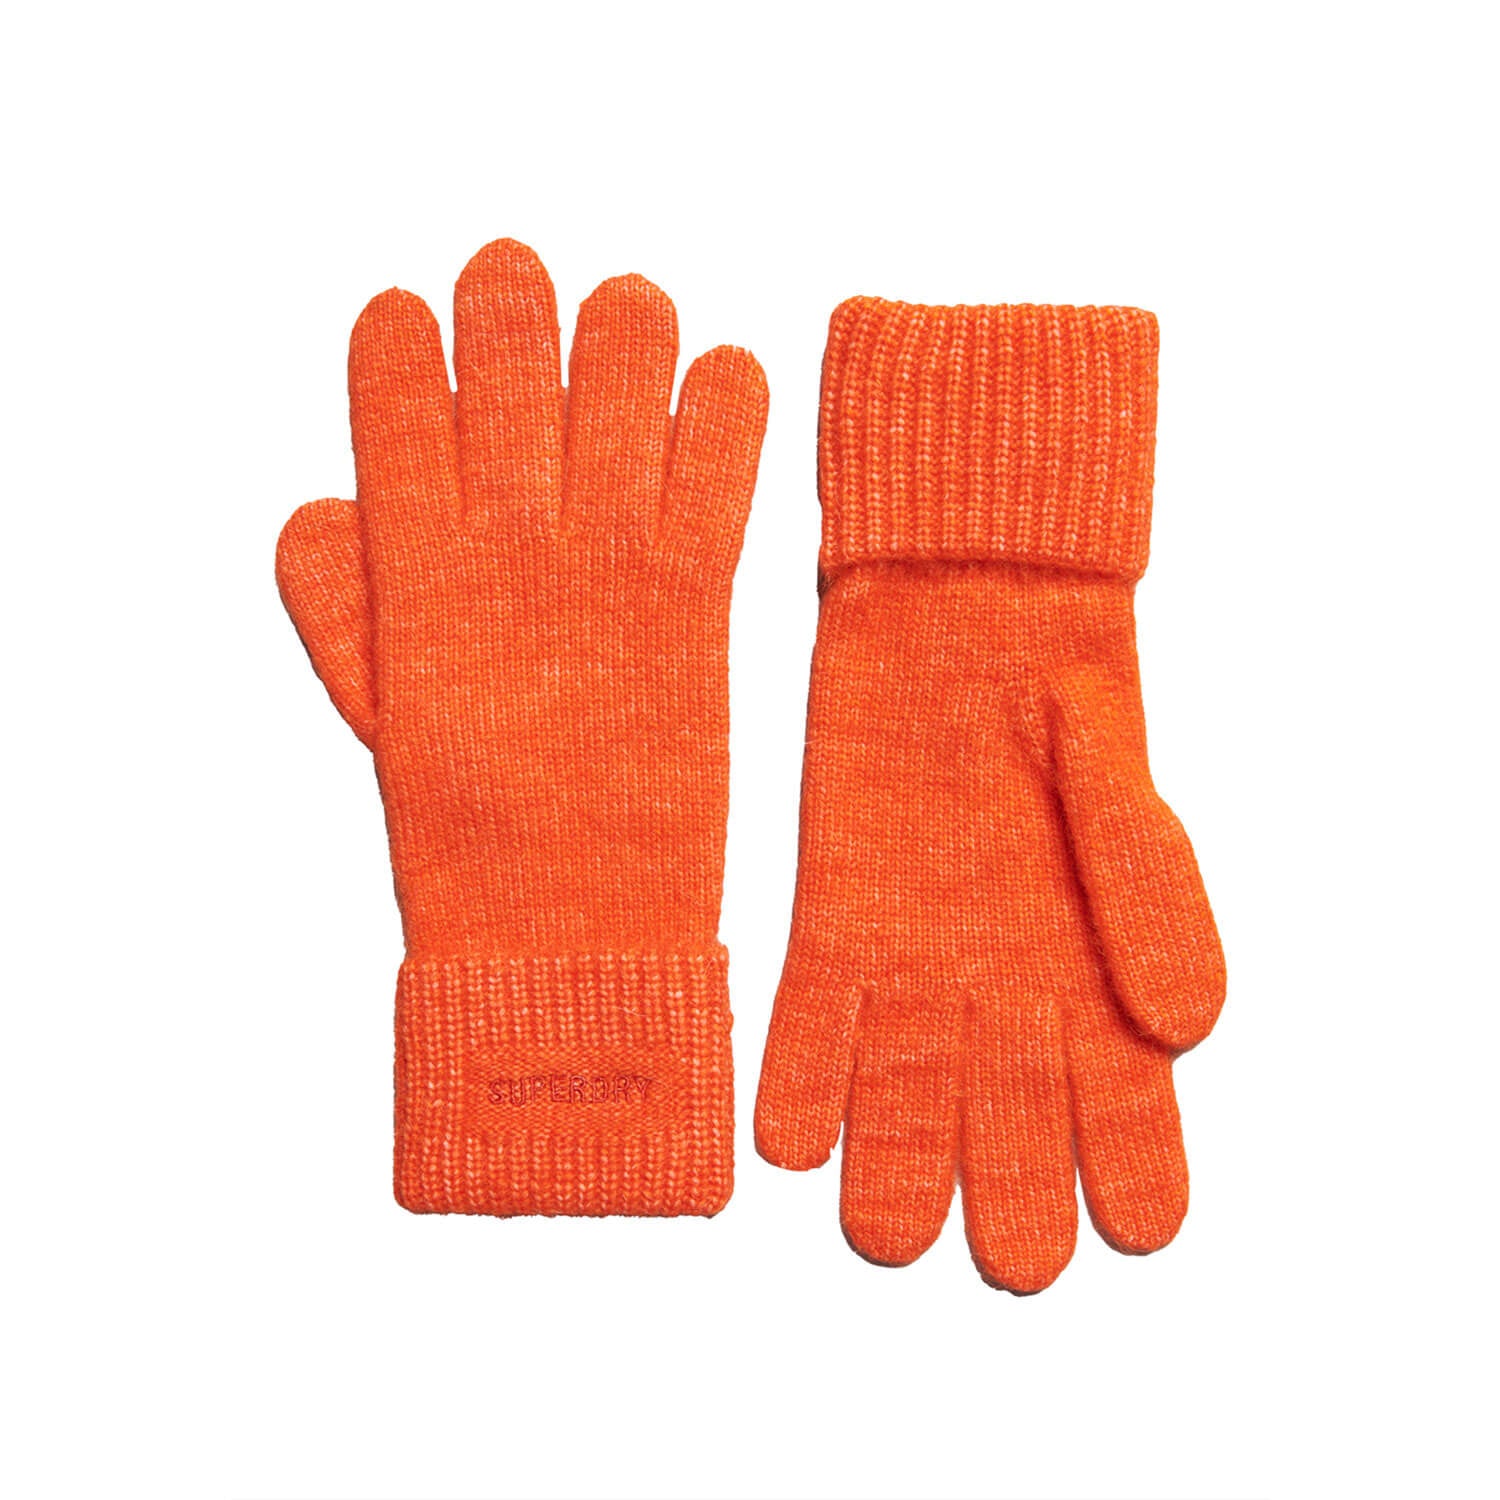 Superdry Essential Ribbed Gloves - Orange 1 Shaws Department Stores